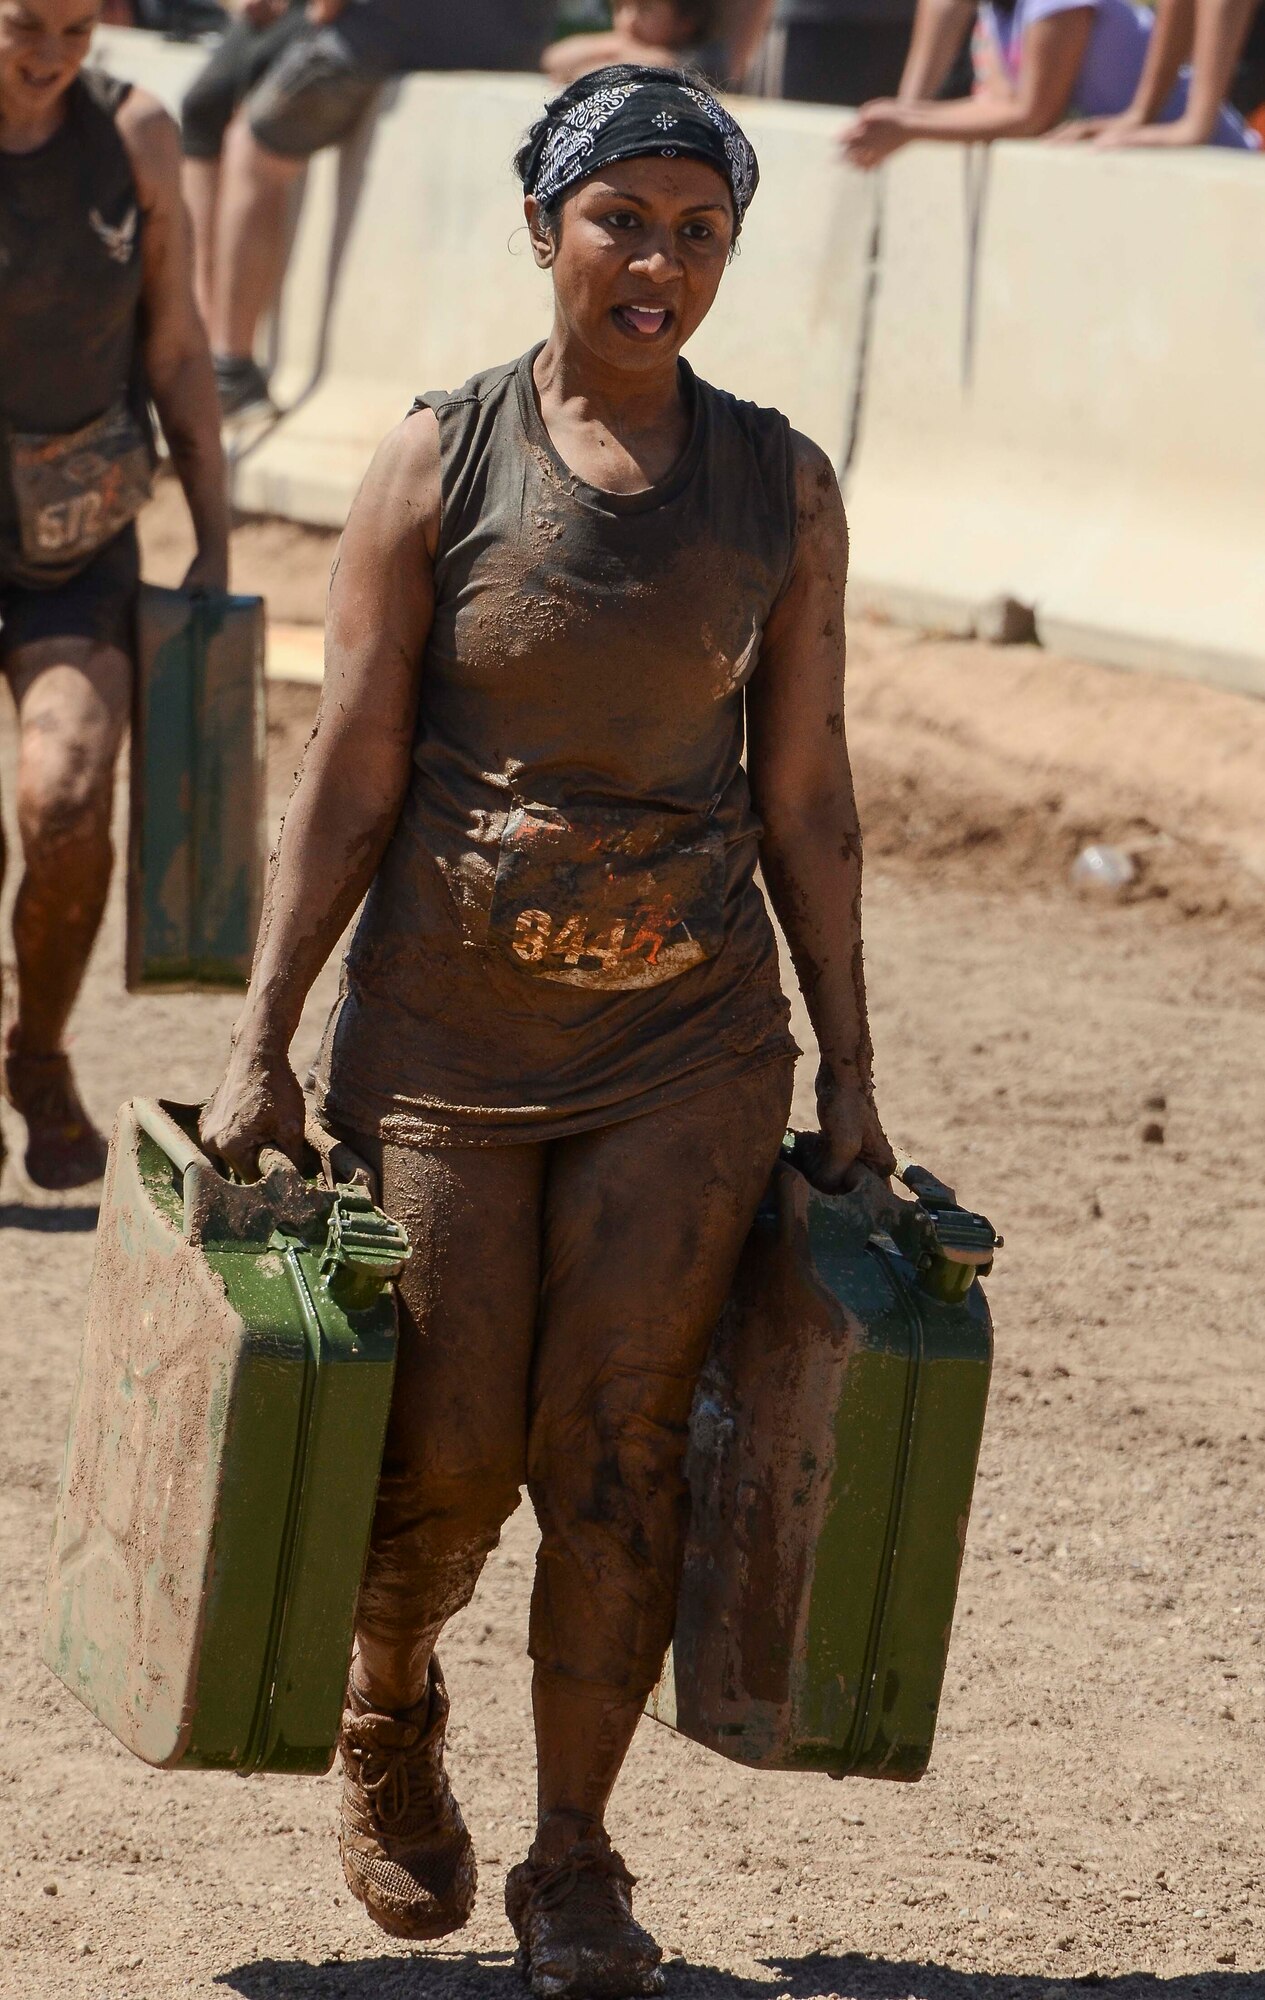 Irene Ramey, 12th Air Force (Air Forces Southern) Services Chief, carries jugs filled with water during her team’s last stretch of the Hard Charge Televised Obstacle Mission at the Pima County Fairgrounds in Tucson, Ariz., on March 29. The team of 11 members completed the four mile course with of obstacles designed to utilize a mix of strength, stamina, balance, and body awareness that pushed participants to both mental and physical fatigue. (U.S. Air Force photo by Staff Sgt. Adam Grant/Released)